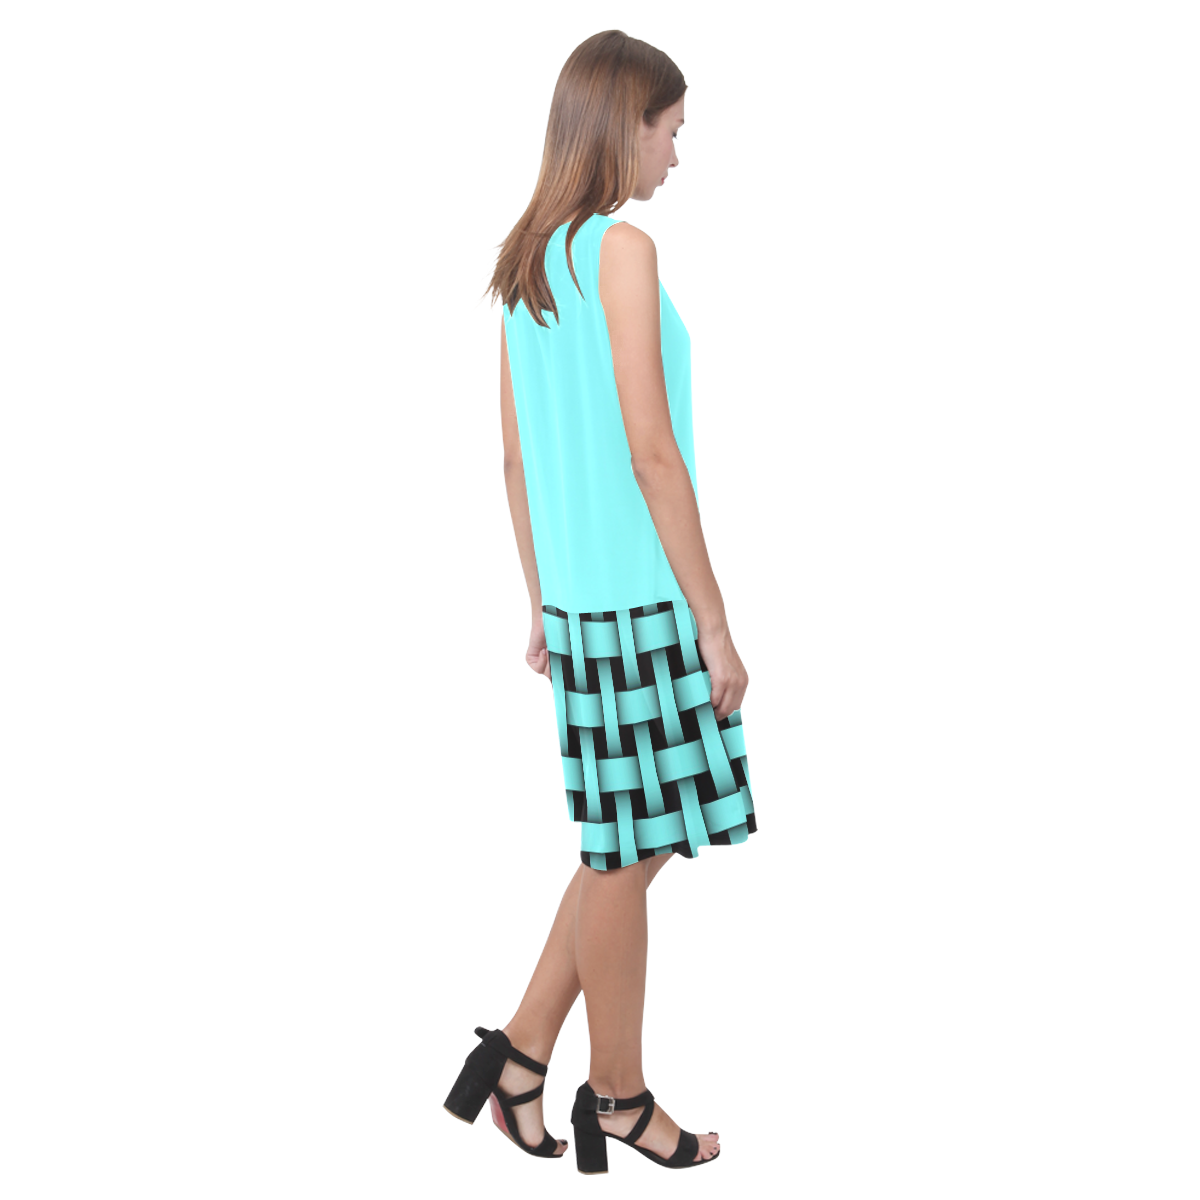 Womens Baby Blue by Tell3People Sleeveless Splicing Shift Dress(Model D17)